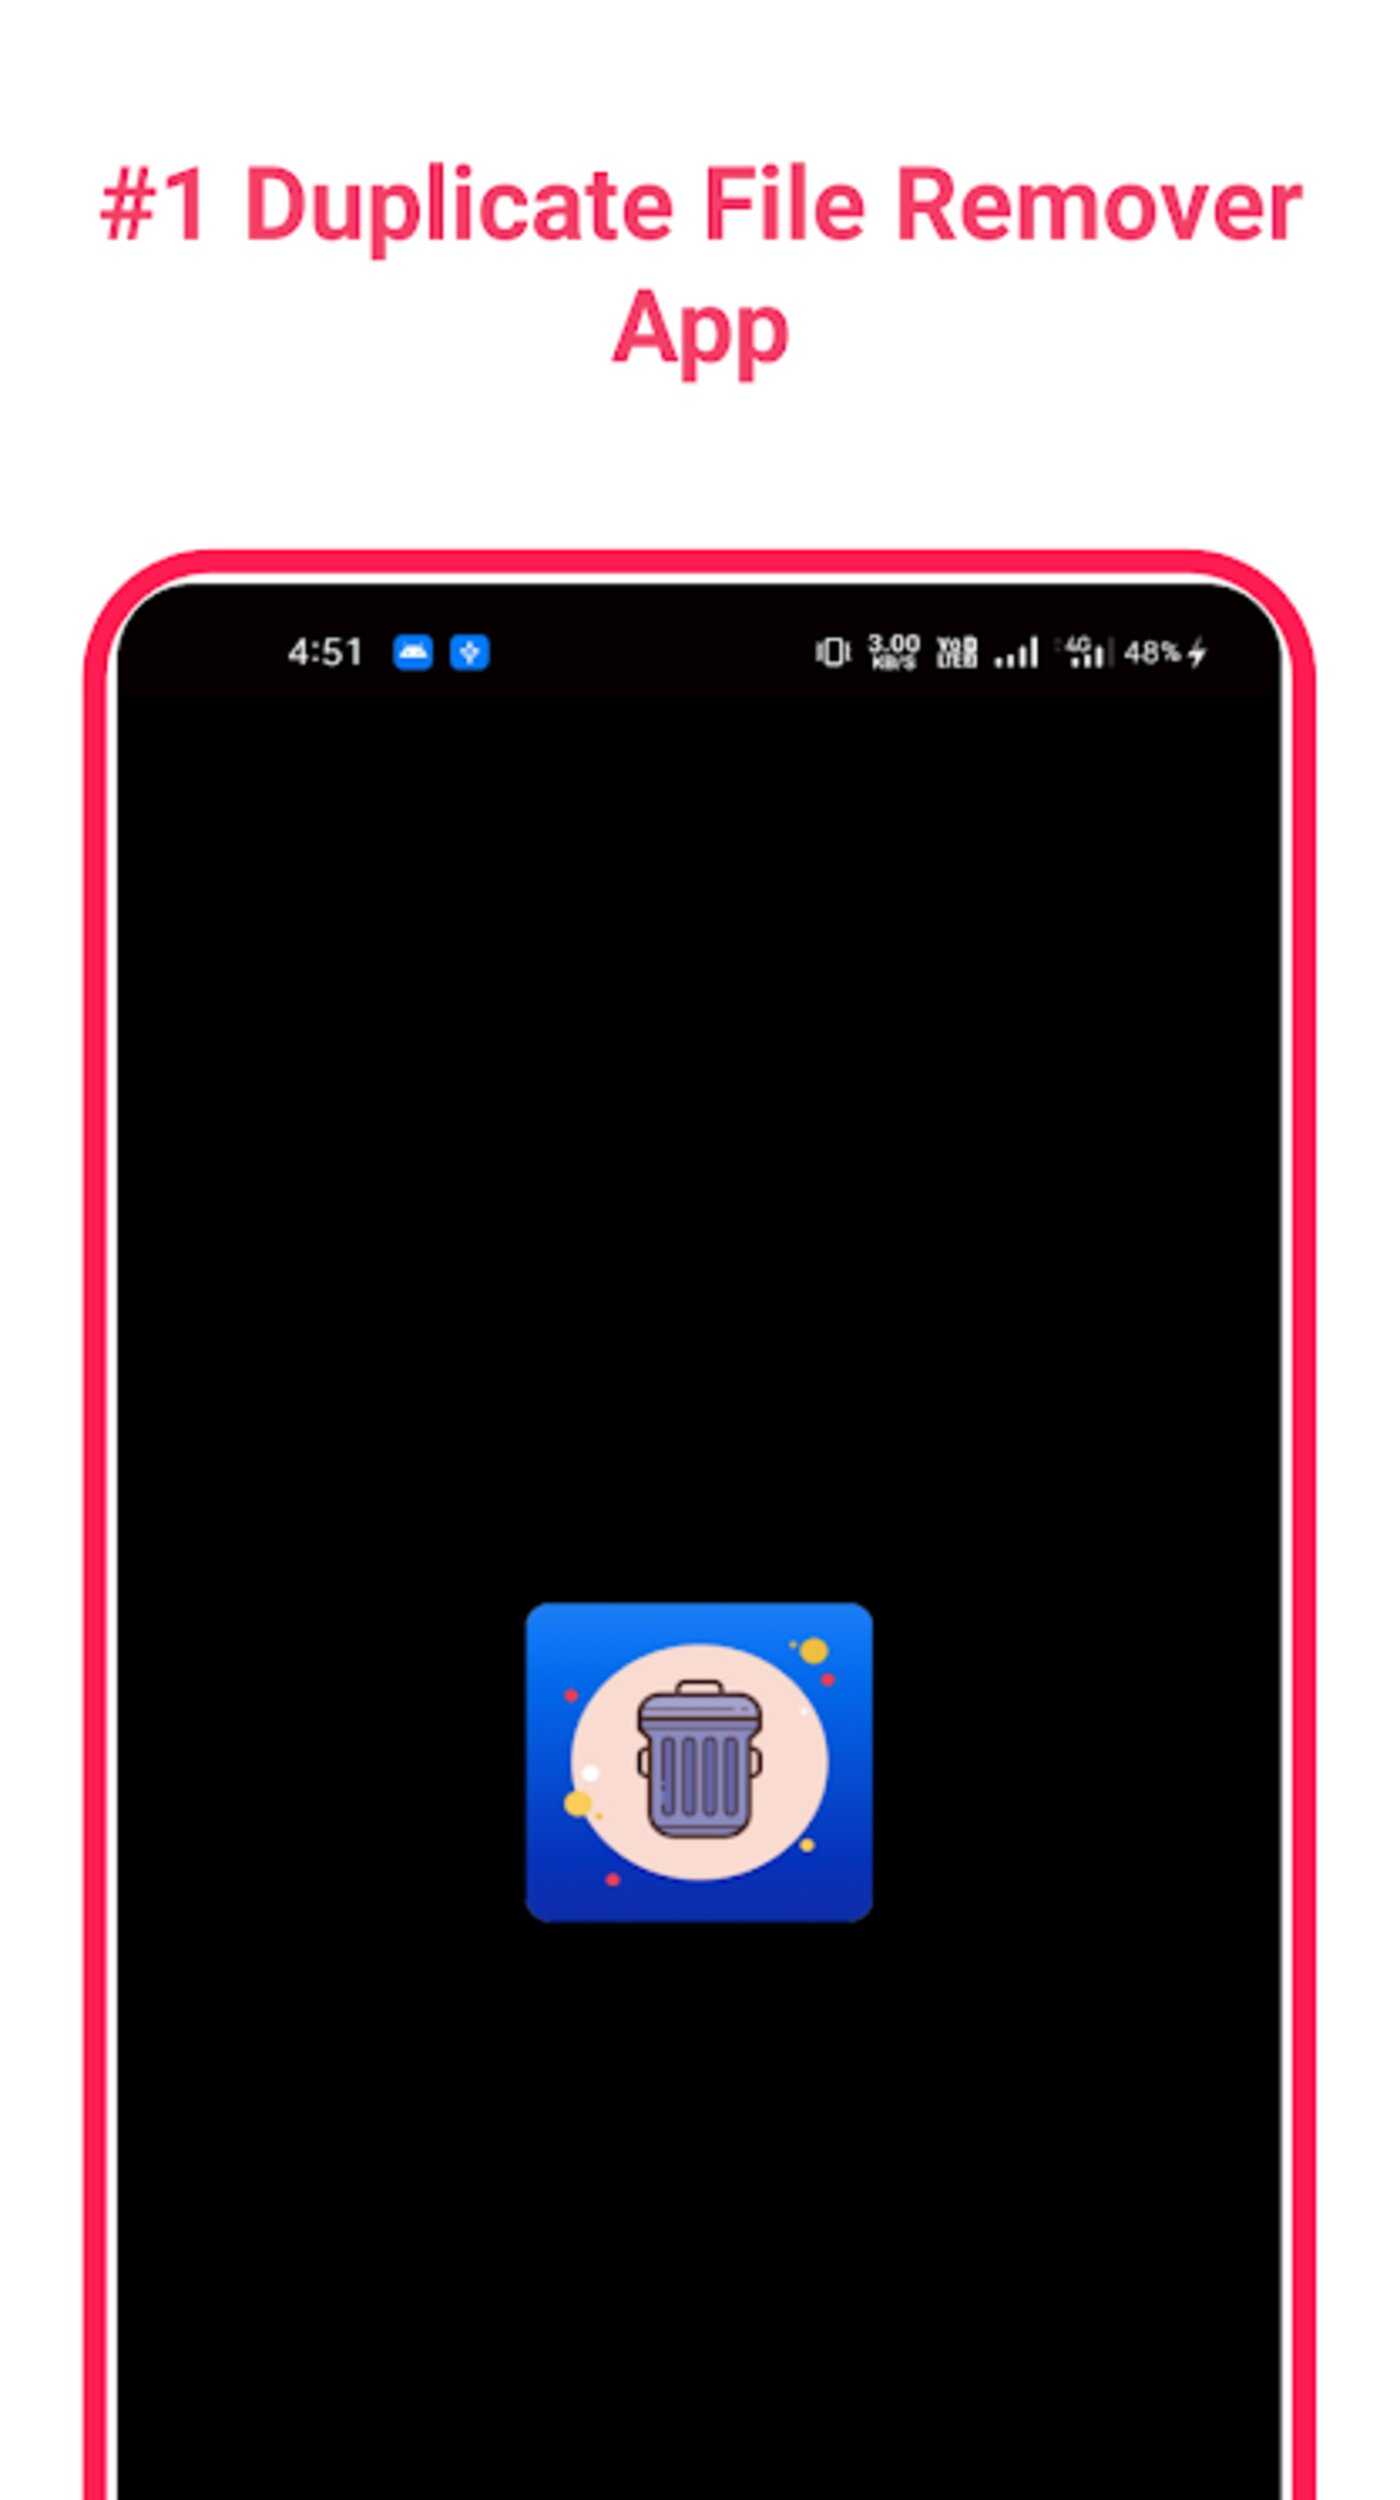 90X Duplicate File Remover Pro v1.1 (Paid) APK